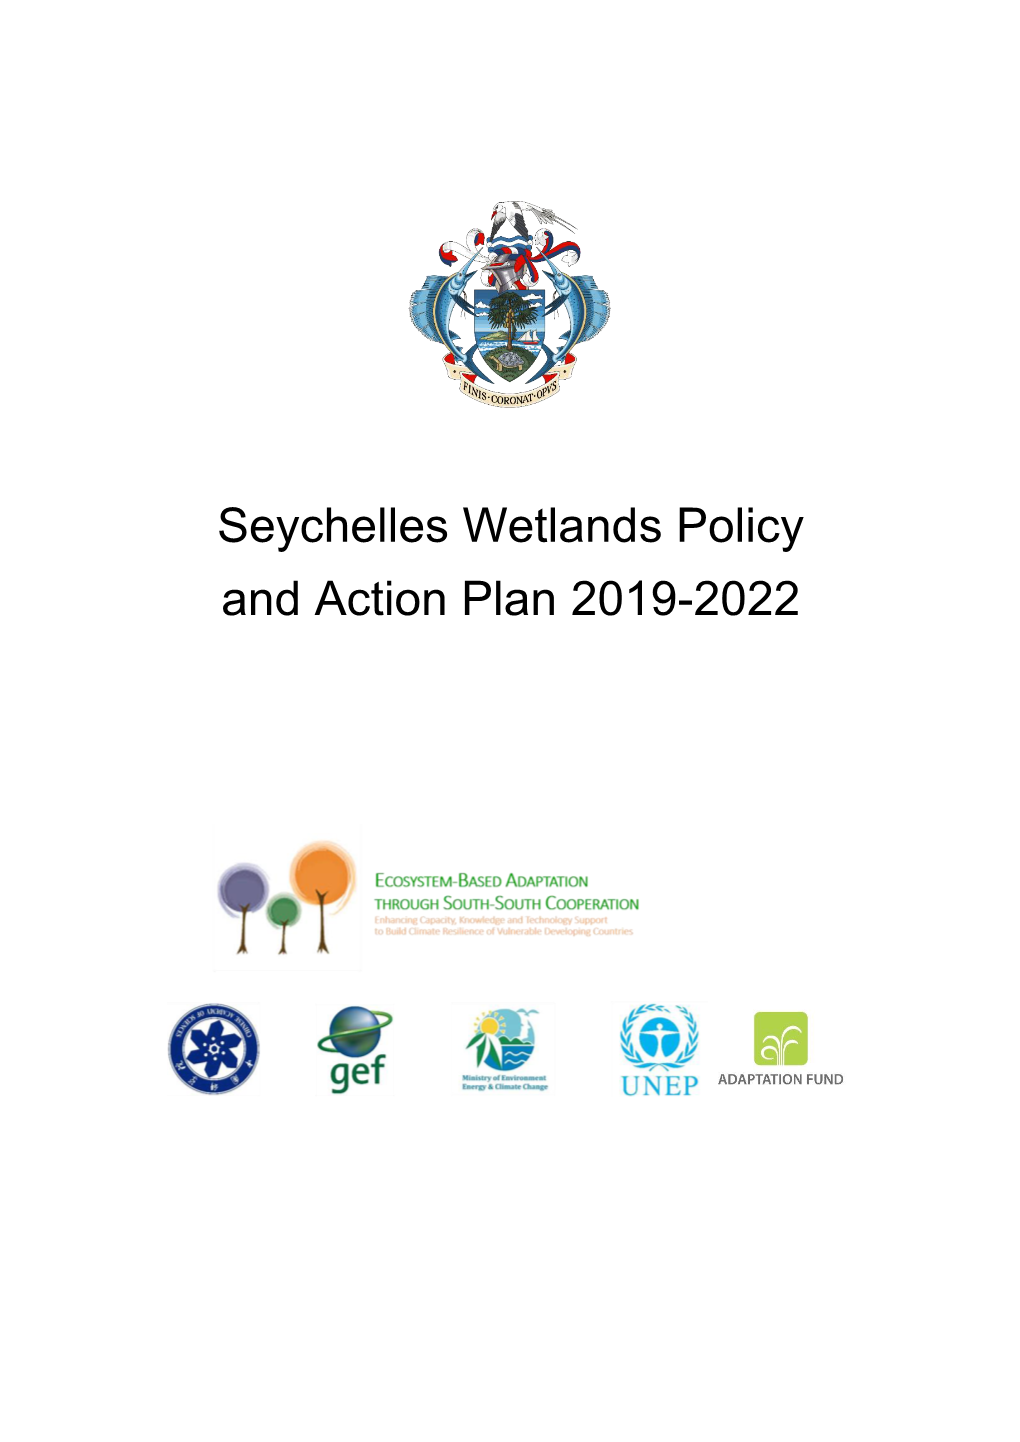 Seychelles Wetlands Policy and Action Plan 2019-2022